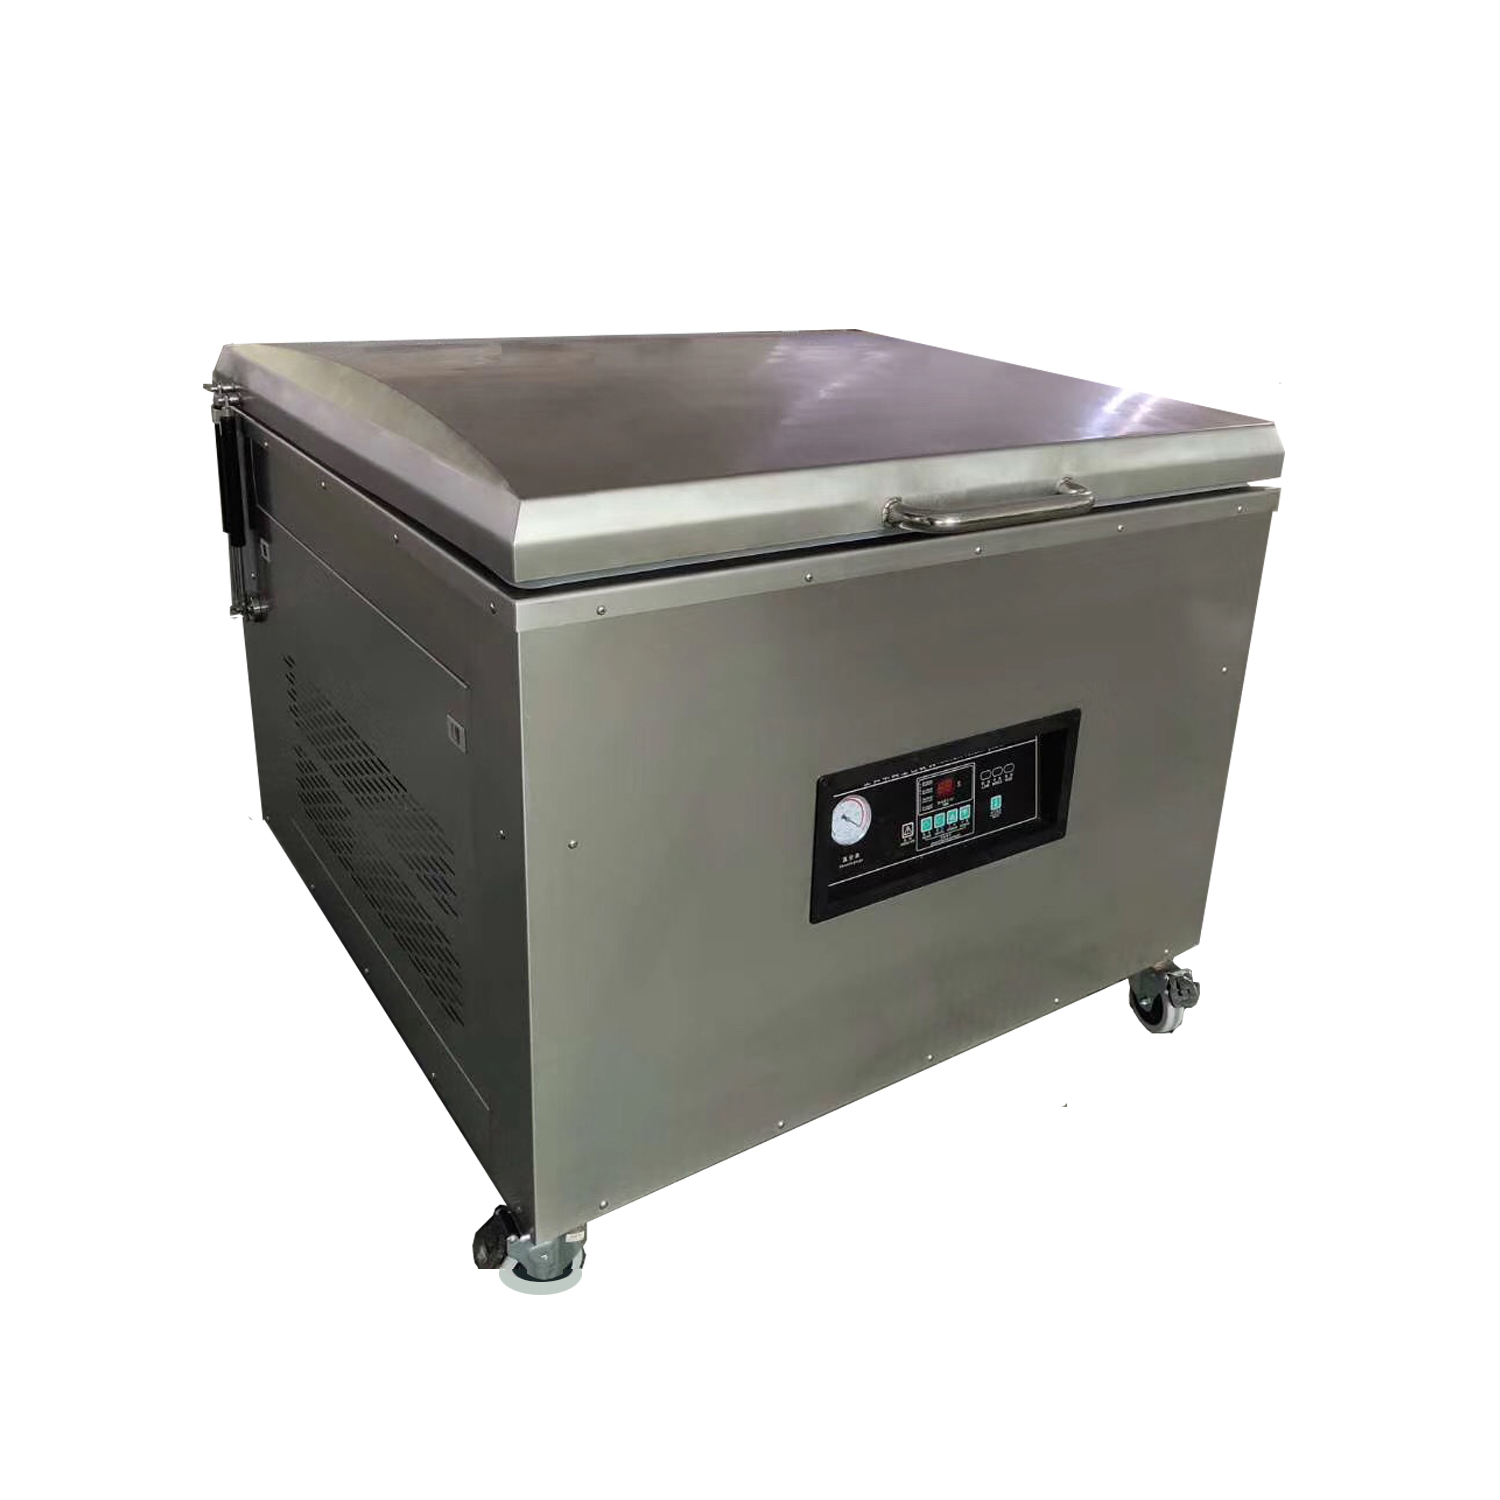 Commercial Single Chamber Vacuum Sealer with Dual Seal Bars